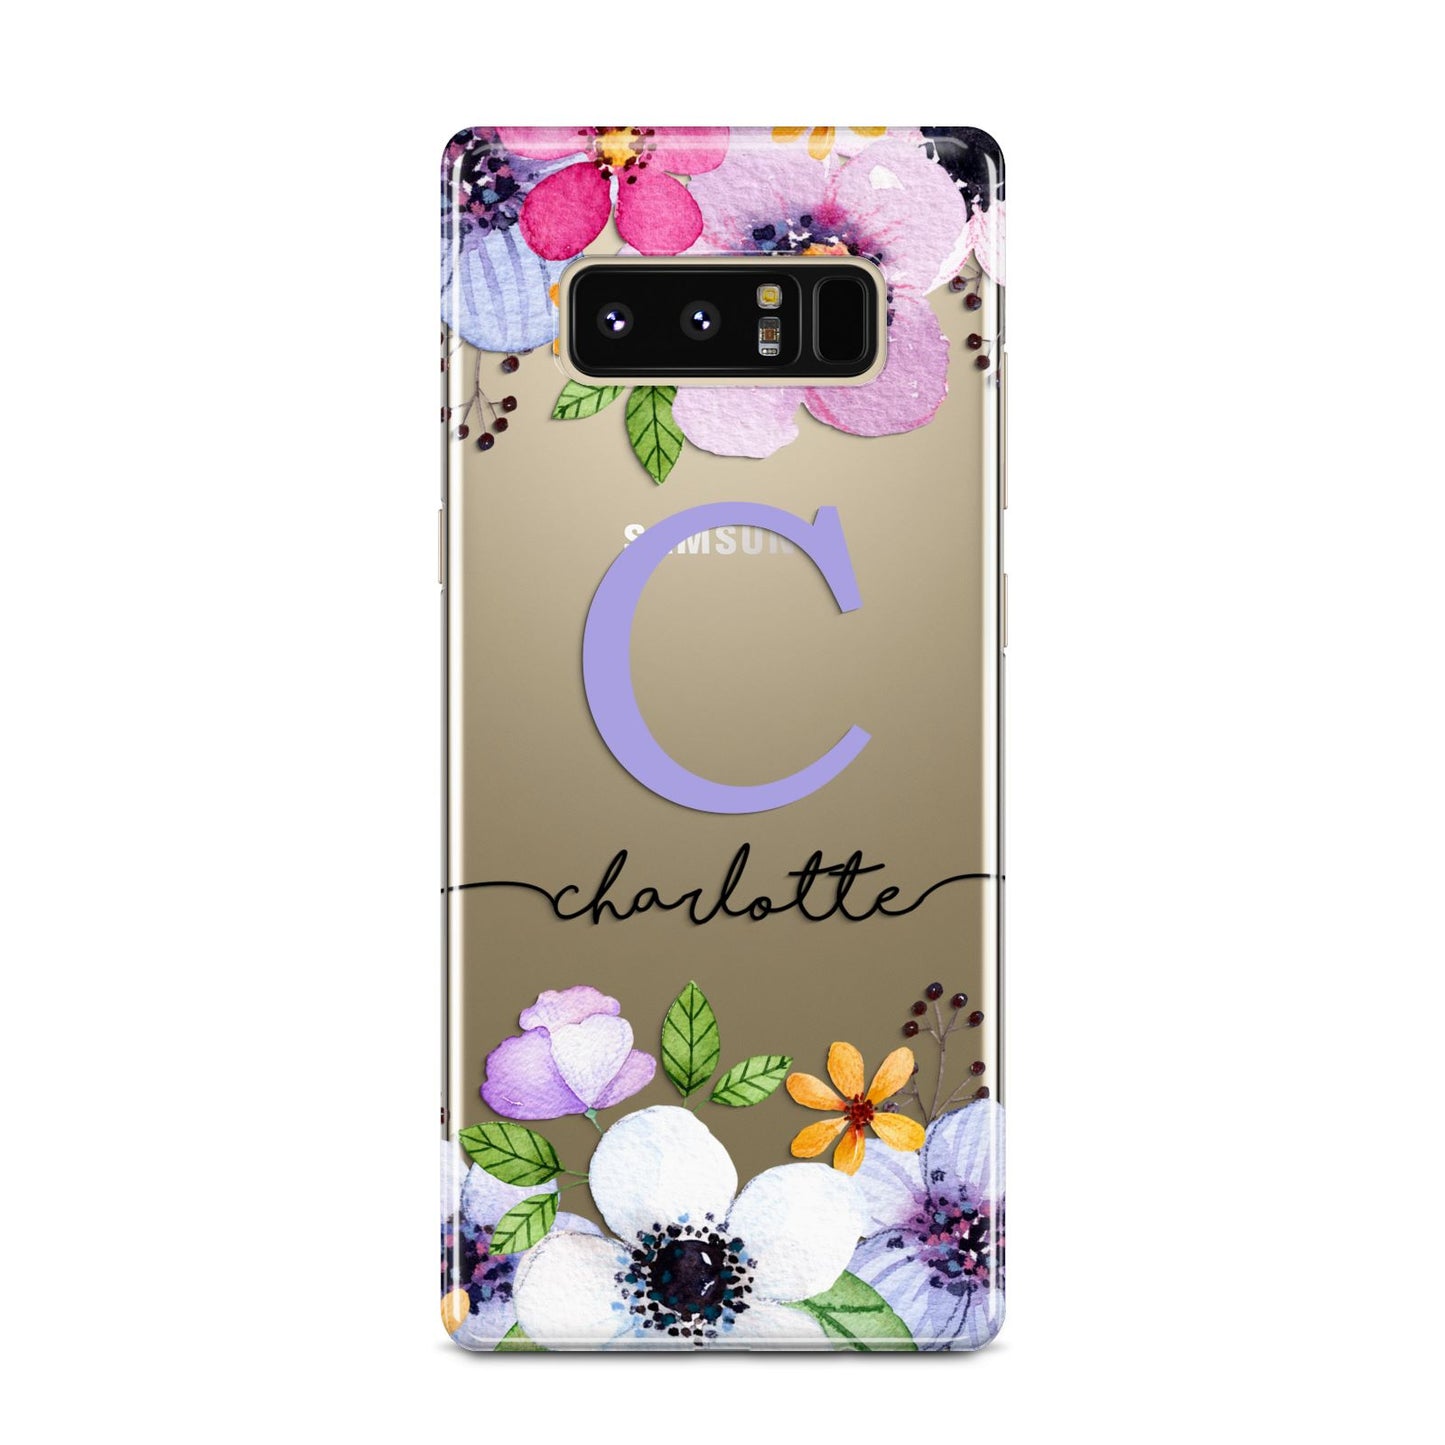 Personalised Violet Flowers Samsung Galaxy Note 8 Case